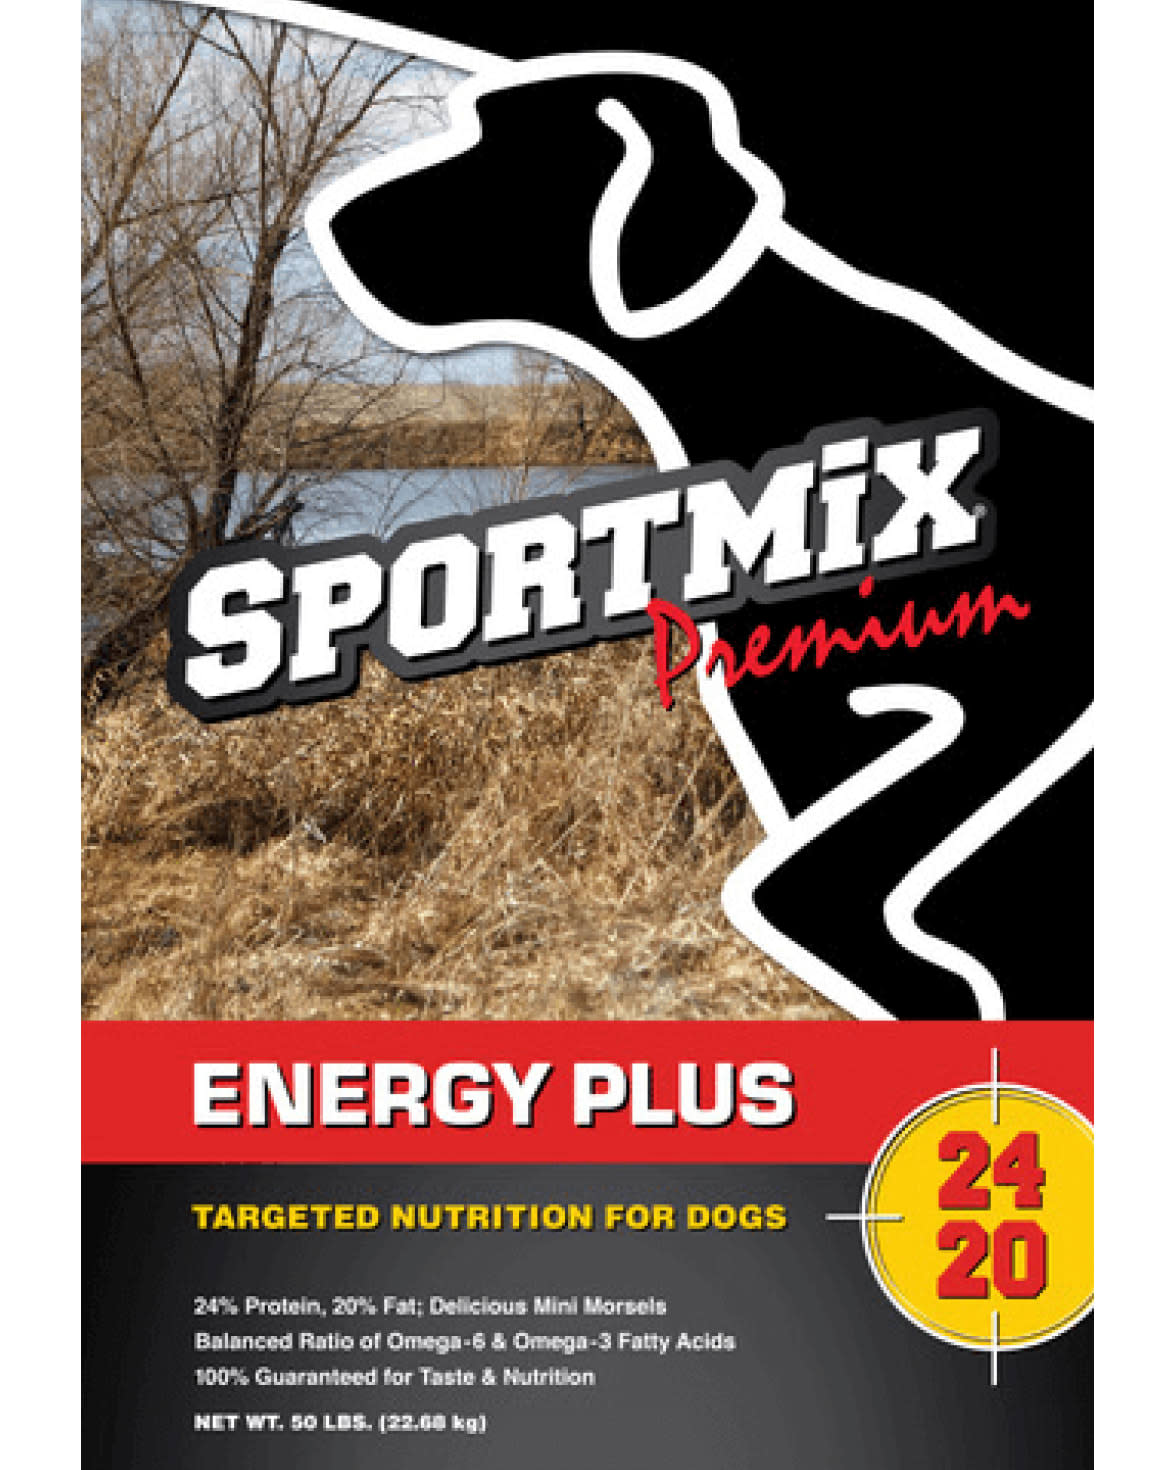 Sportmix Energy Plus dog food is one of the products being recalled by Midwestern Pet Foods. (FDA)